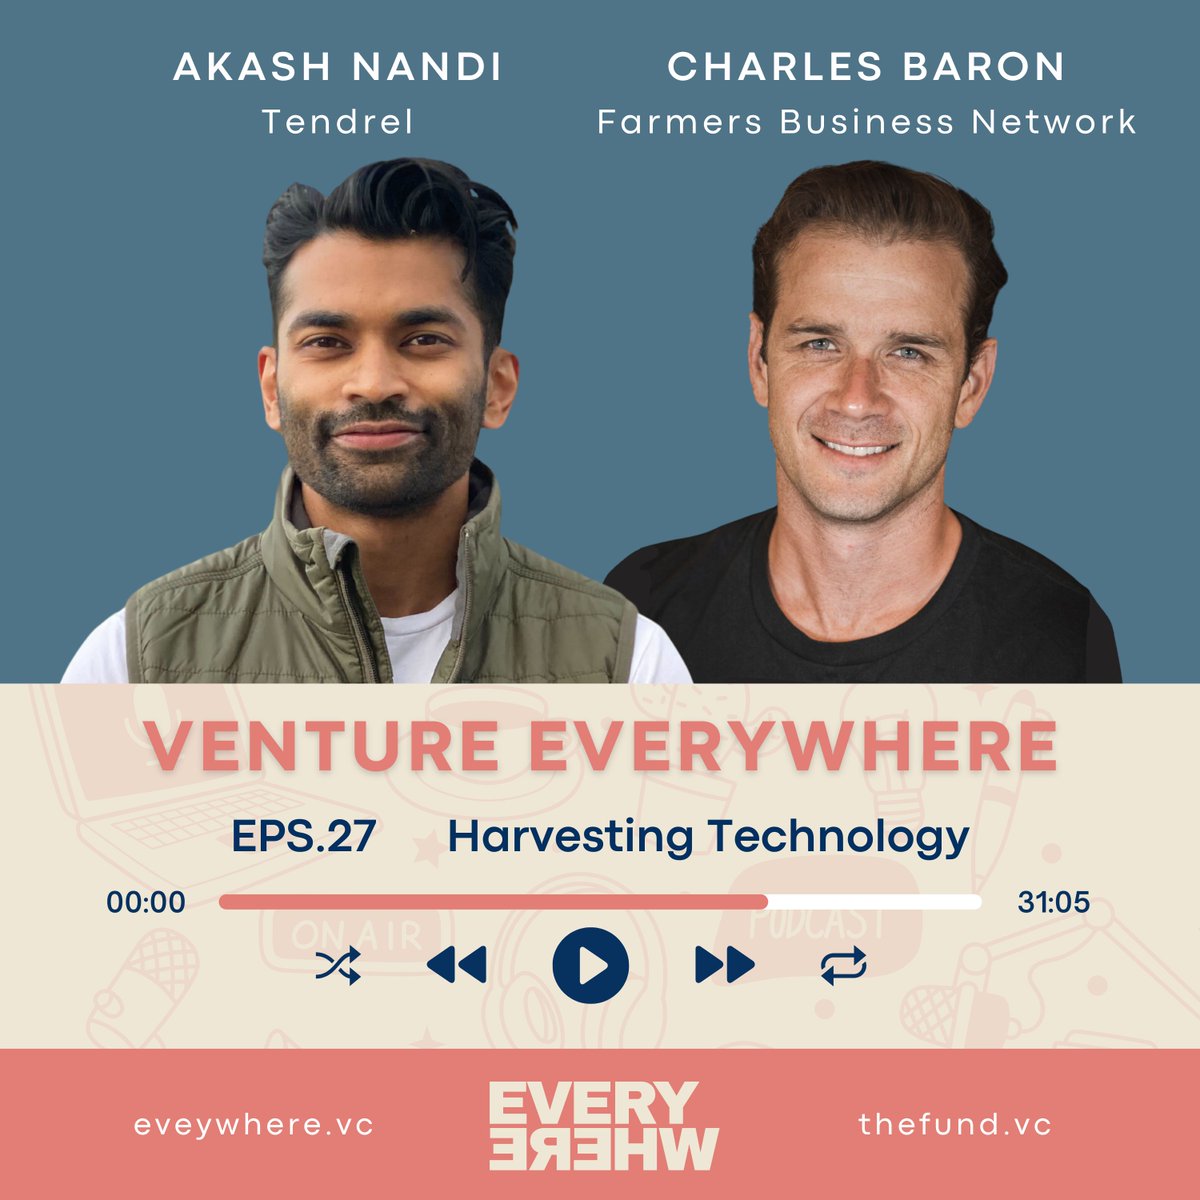 ON AIR: Venture Everywhere #Podcast EPS27🎙️ Harvesting Technology with @charlesbaron, CPMO of @FBNFarmers, & @akash_g_nandi, CEO of @Tendrelinc! 🎧Listen now: 🍎 Apple: podcasts.apple.com/us/podcast/har… 💚 Spotify: open.spotify.com/episode/2trNys… 🗒️ Transcript at ideas.everywhere.vc/s/podcast